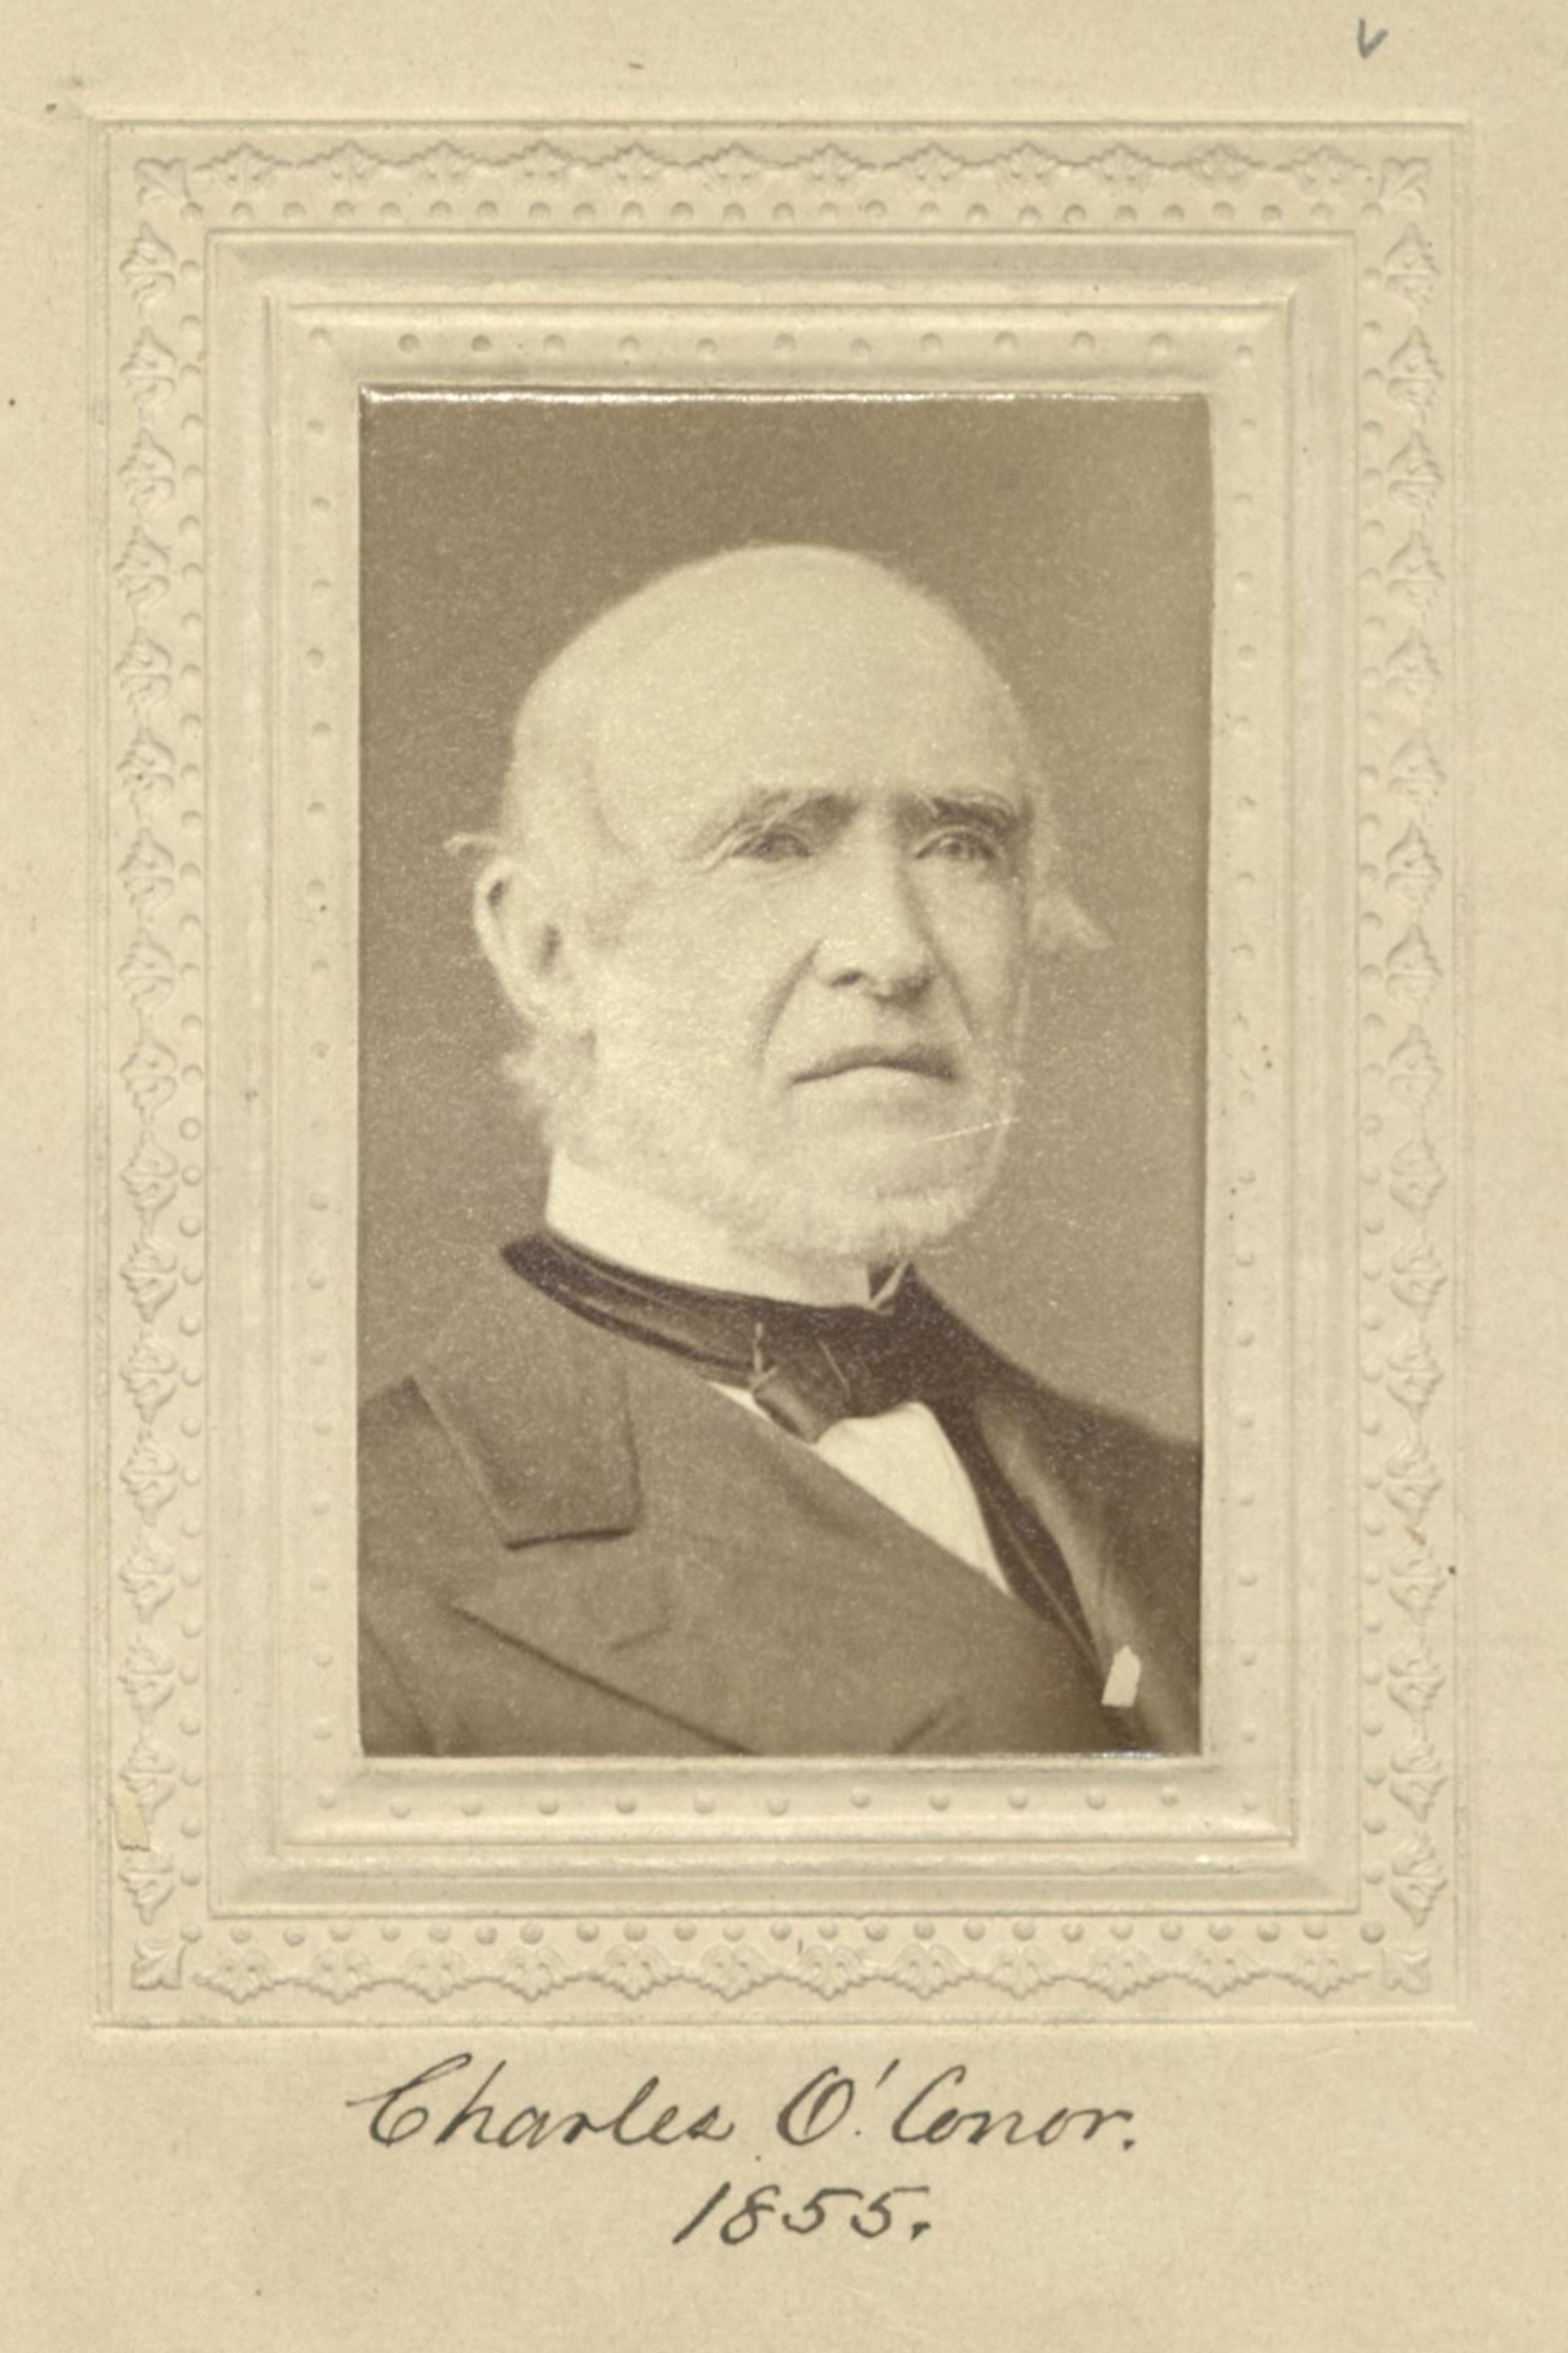 Member portrait of Charles O’Conor